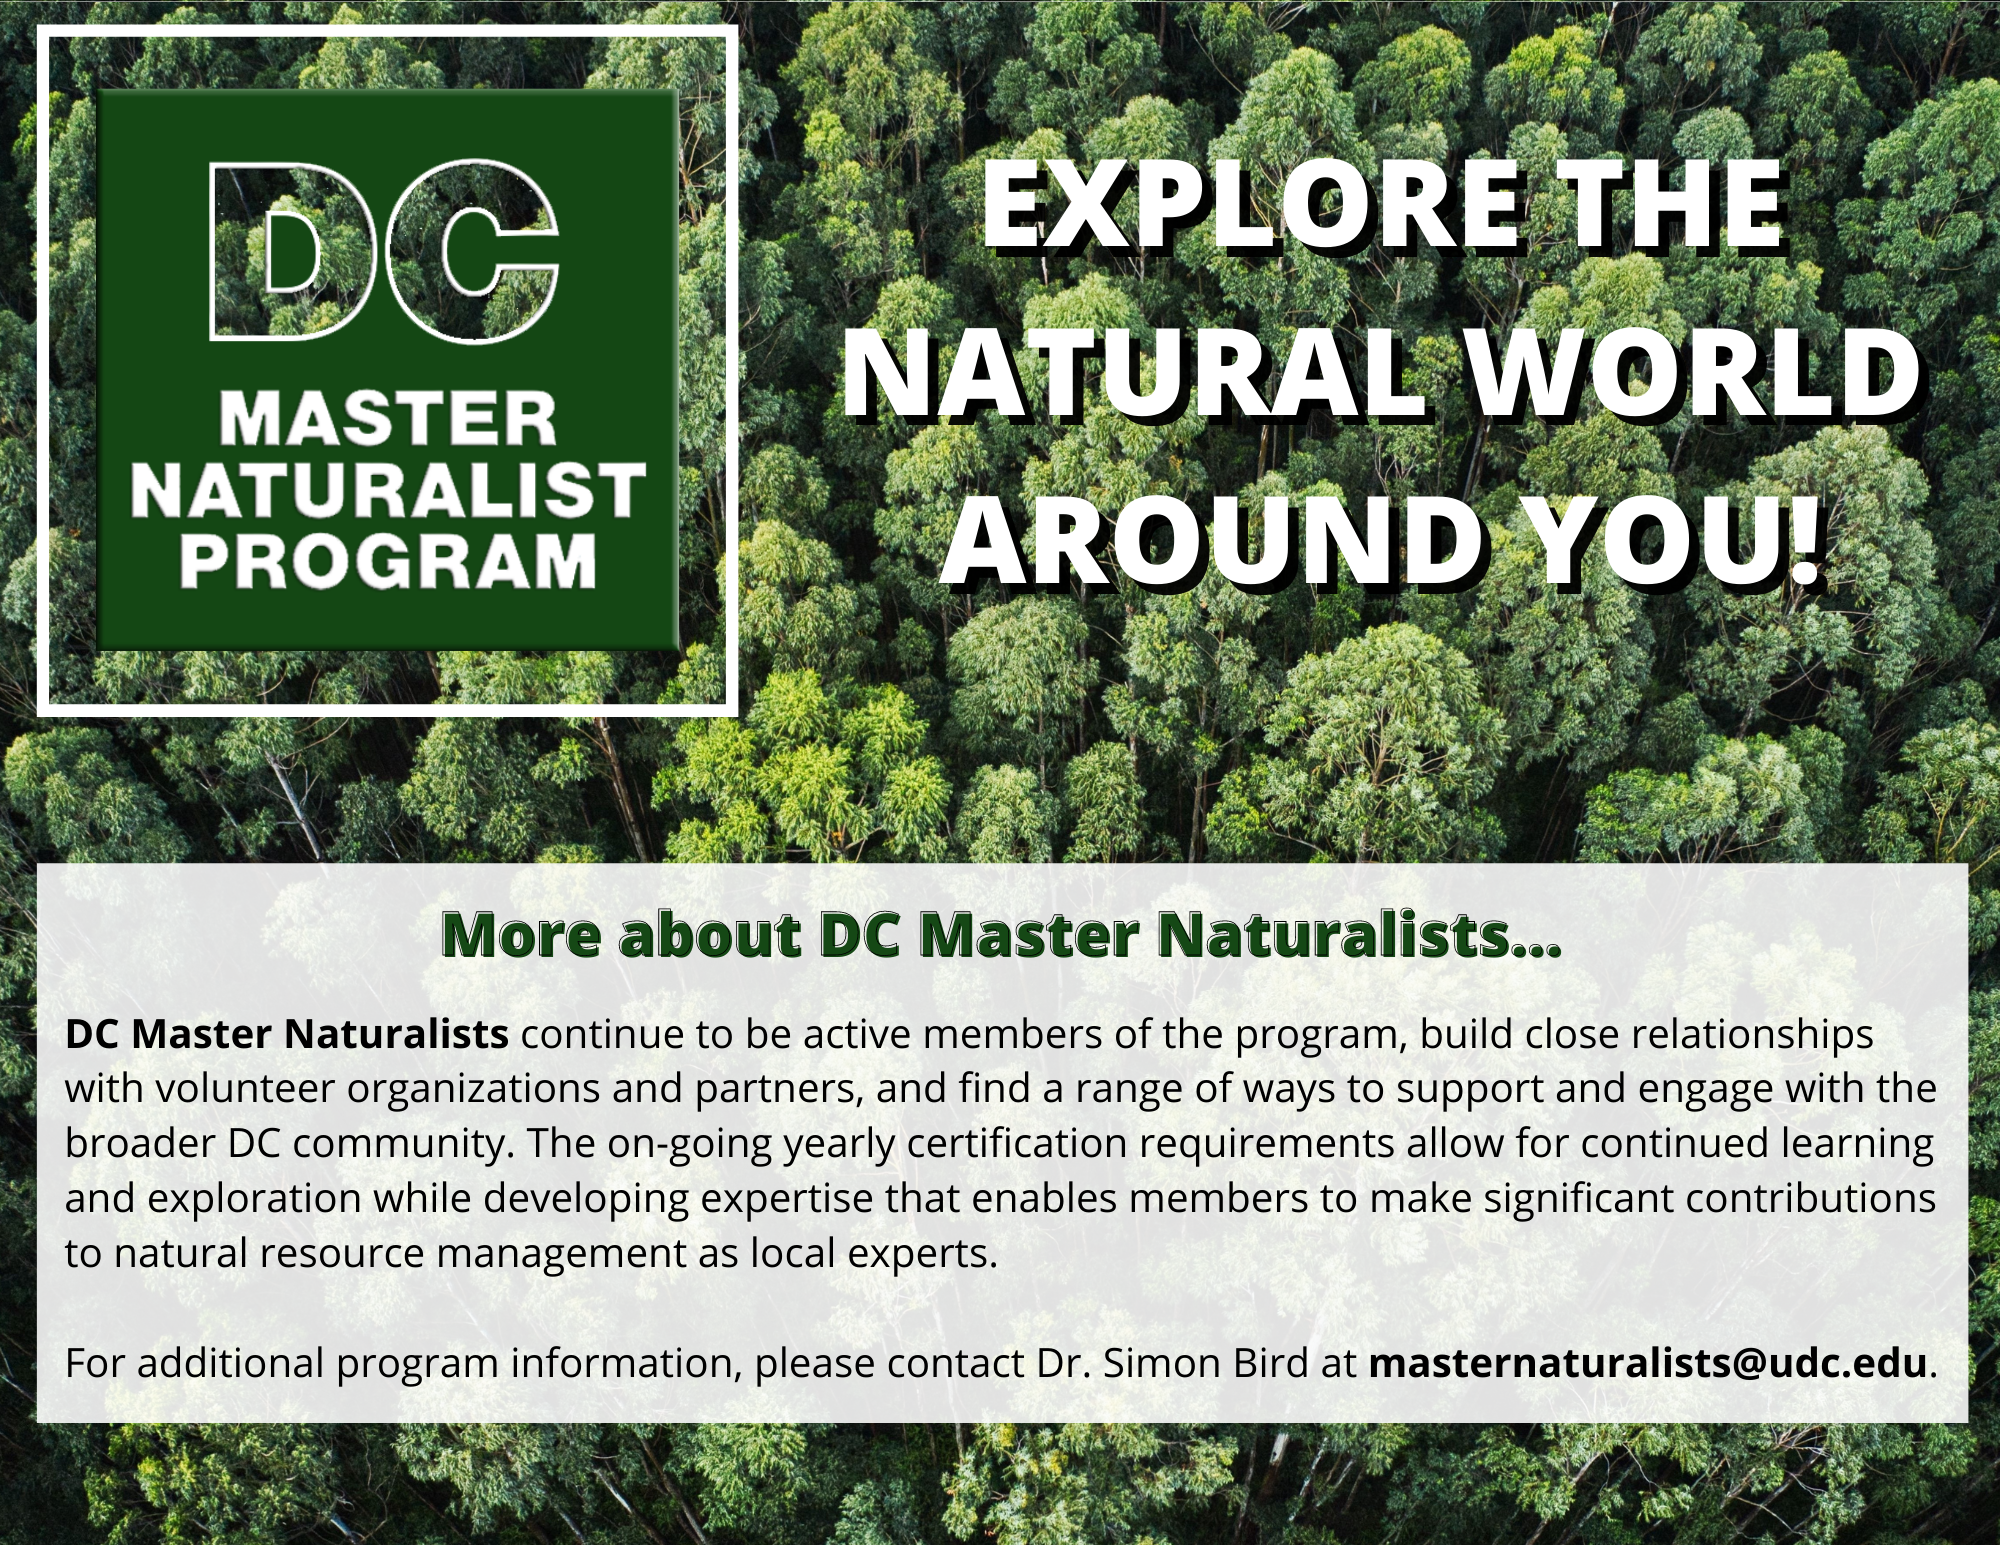 Explore the natural world around you! More about DC Master Naturalists.... DC Master Naturalists continue to be active members of the program, build close relationships with volunteer organizations and partners, and find a range of ways to support and engage with the broader DC community. The on-going yearly certification requirements allow for continued learning and exploration while developing expertise that enables members to make significant contributions to natural resource management as local experts. For additional program information, please contact Dr. Simon Bird at masternaturalists@udc.edu